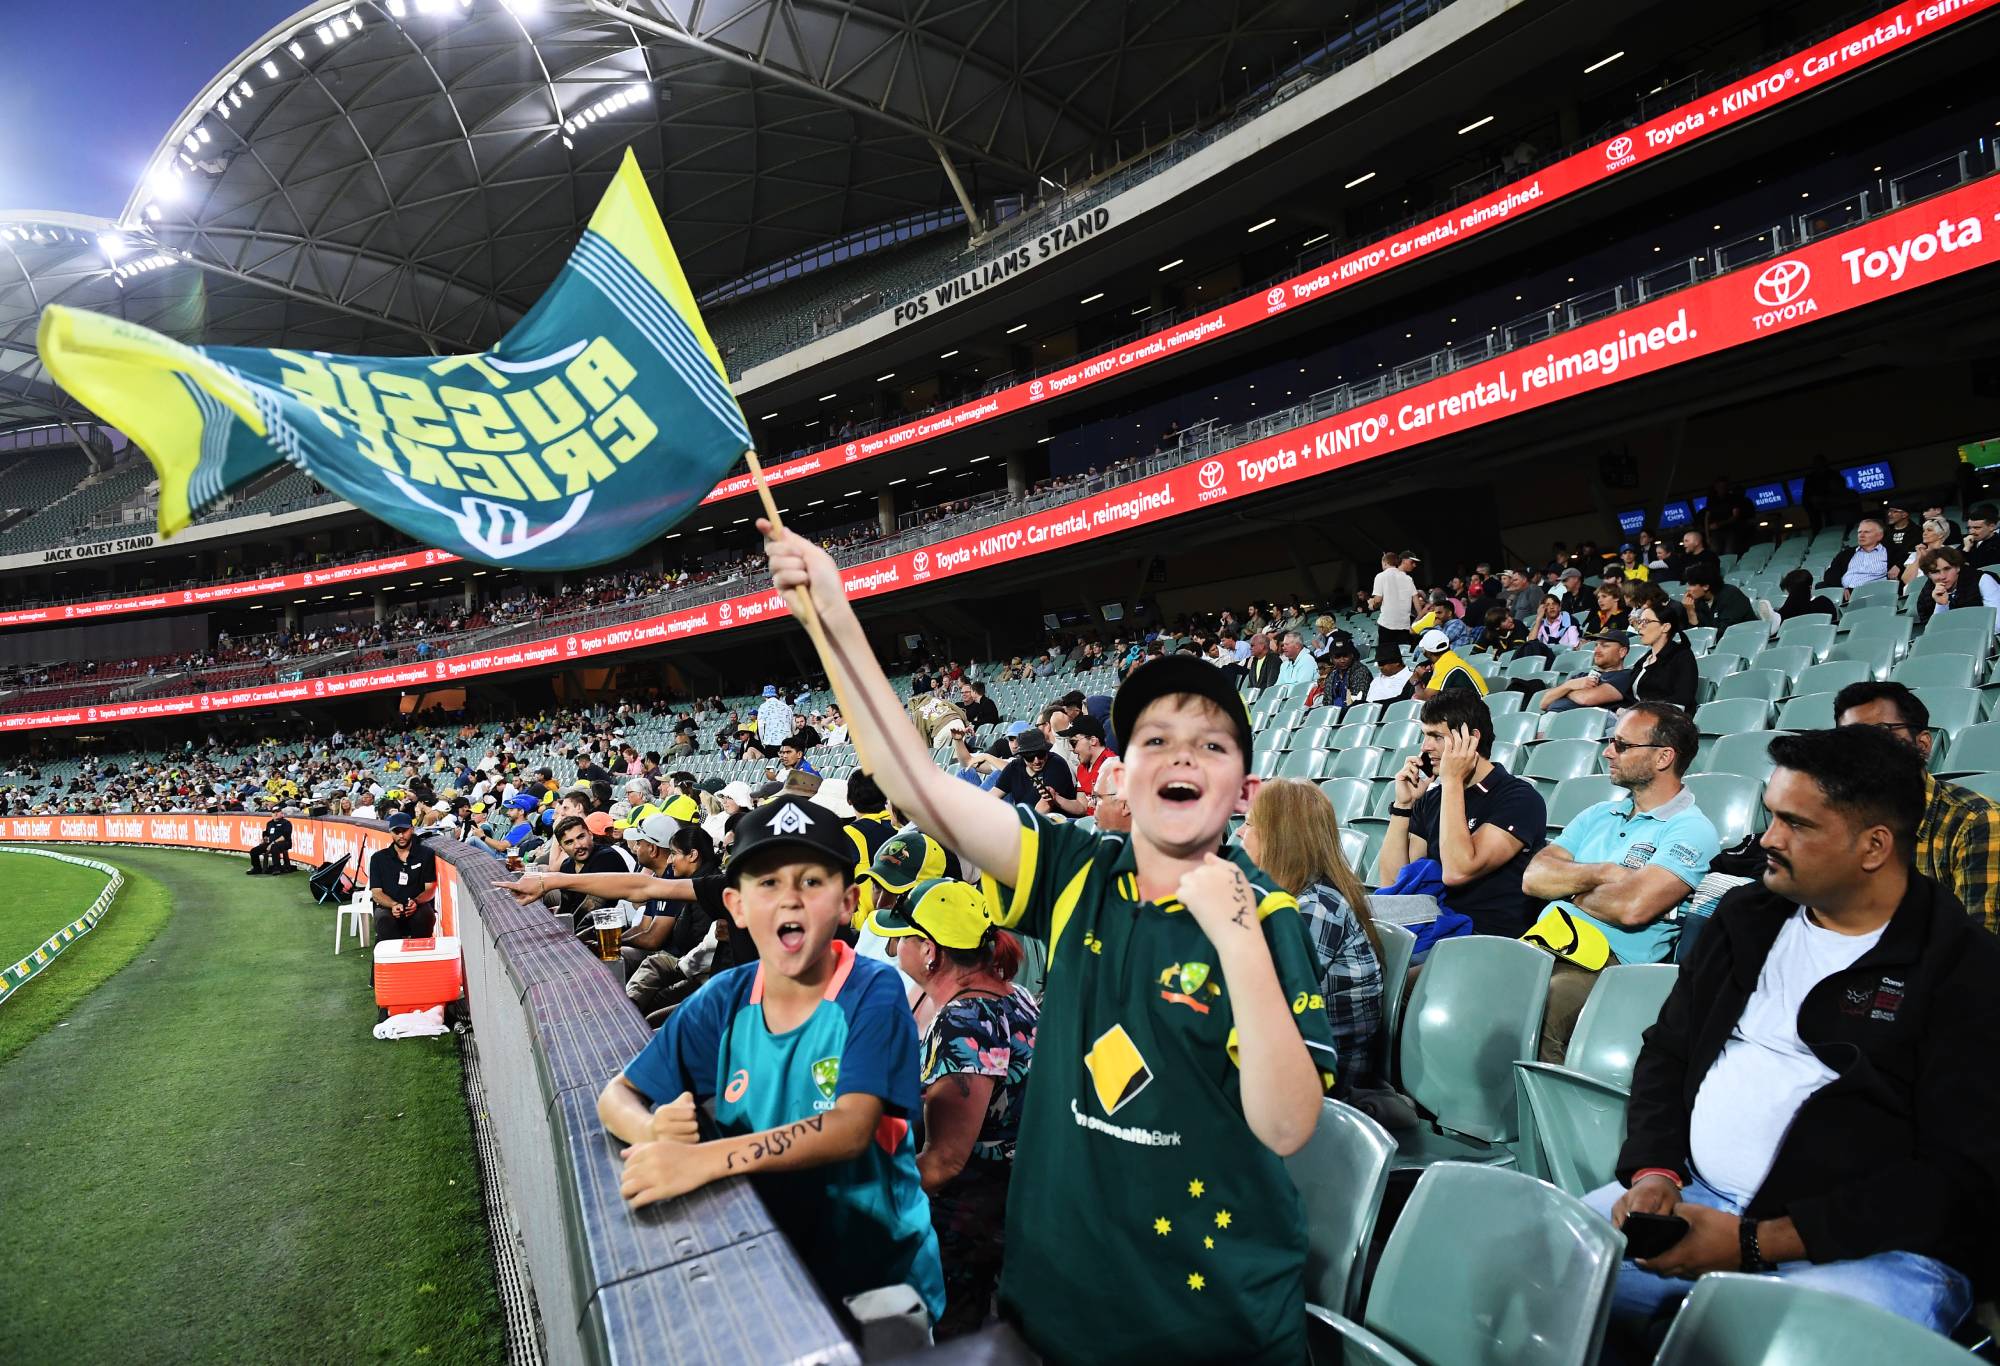 A young Aussie supporter waves a flag during game one of the ODI series against England at Adelaide. (Photo by Mark Brake - CA/Cricket Australia via Getty Images)